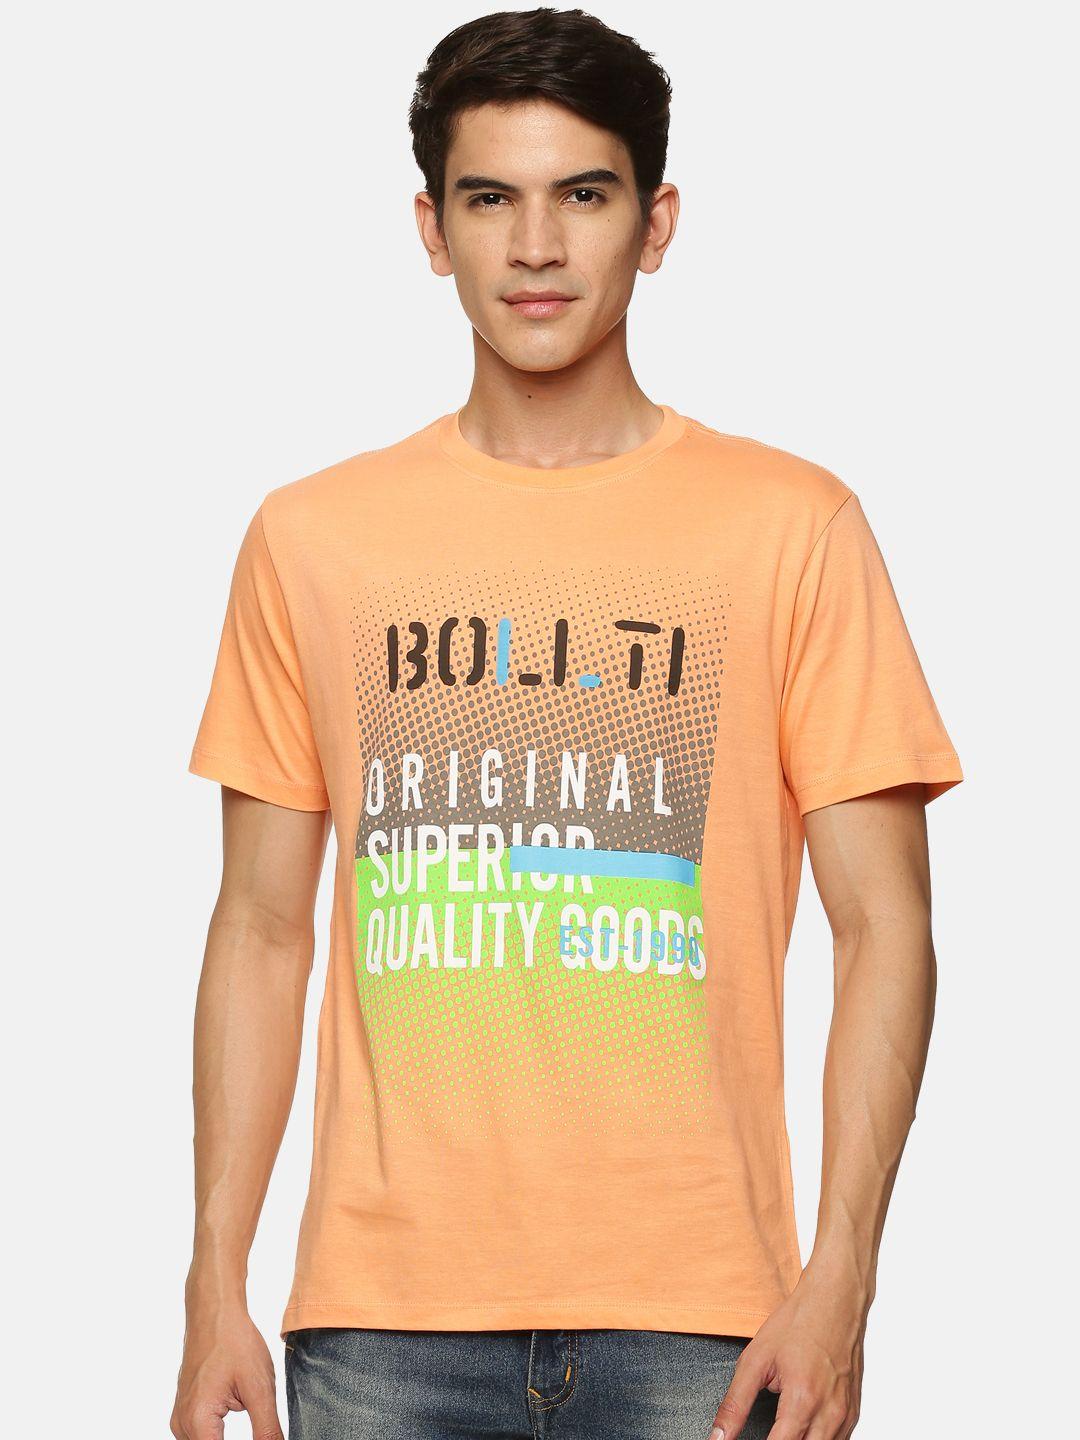 bollti-typography-printed-round-neck-short-sleeves-pure-cotton-t-shirt